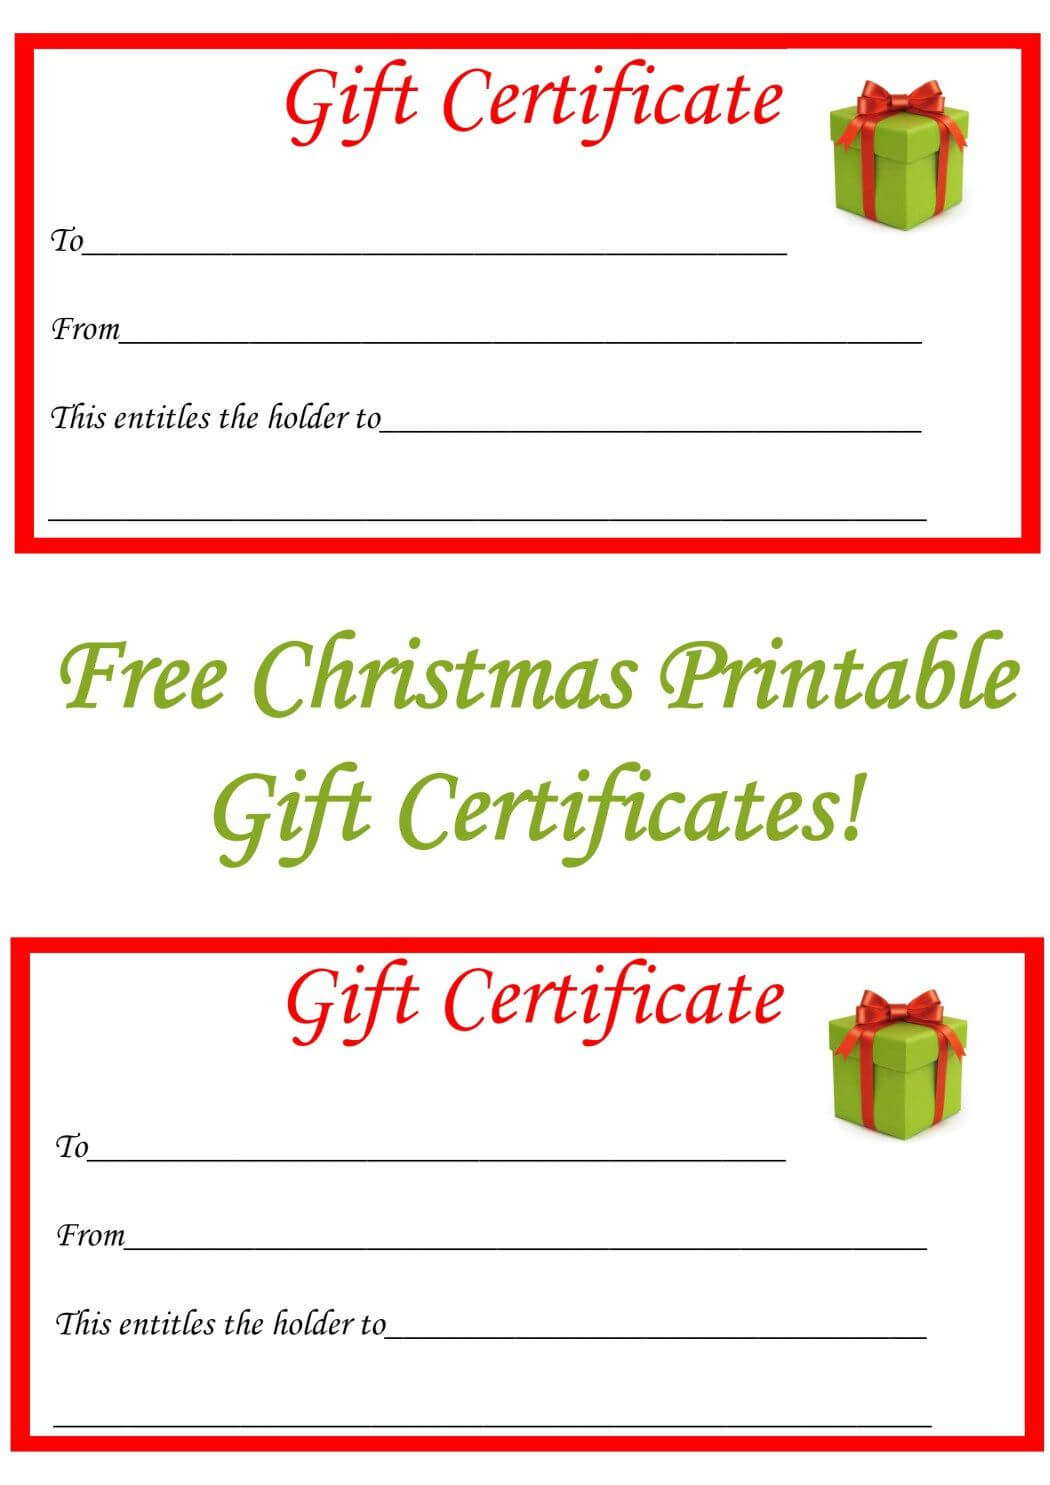 Free Christmas Printable Gift Certificates | Christmas Gift With Regard To Christmas Gift Certificate Template Free Download